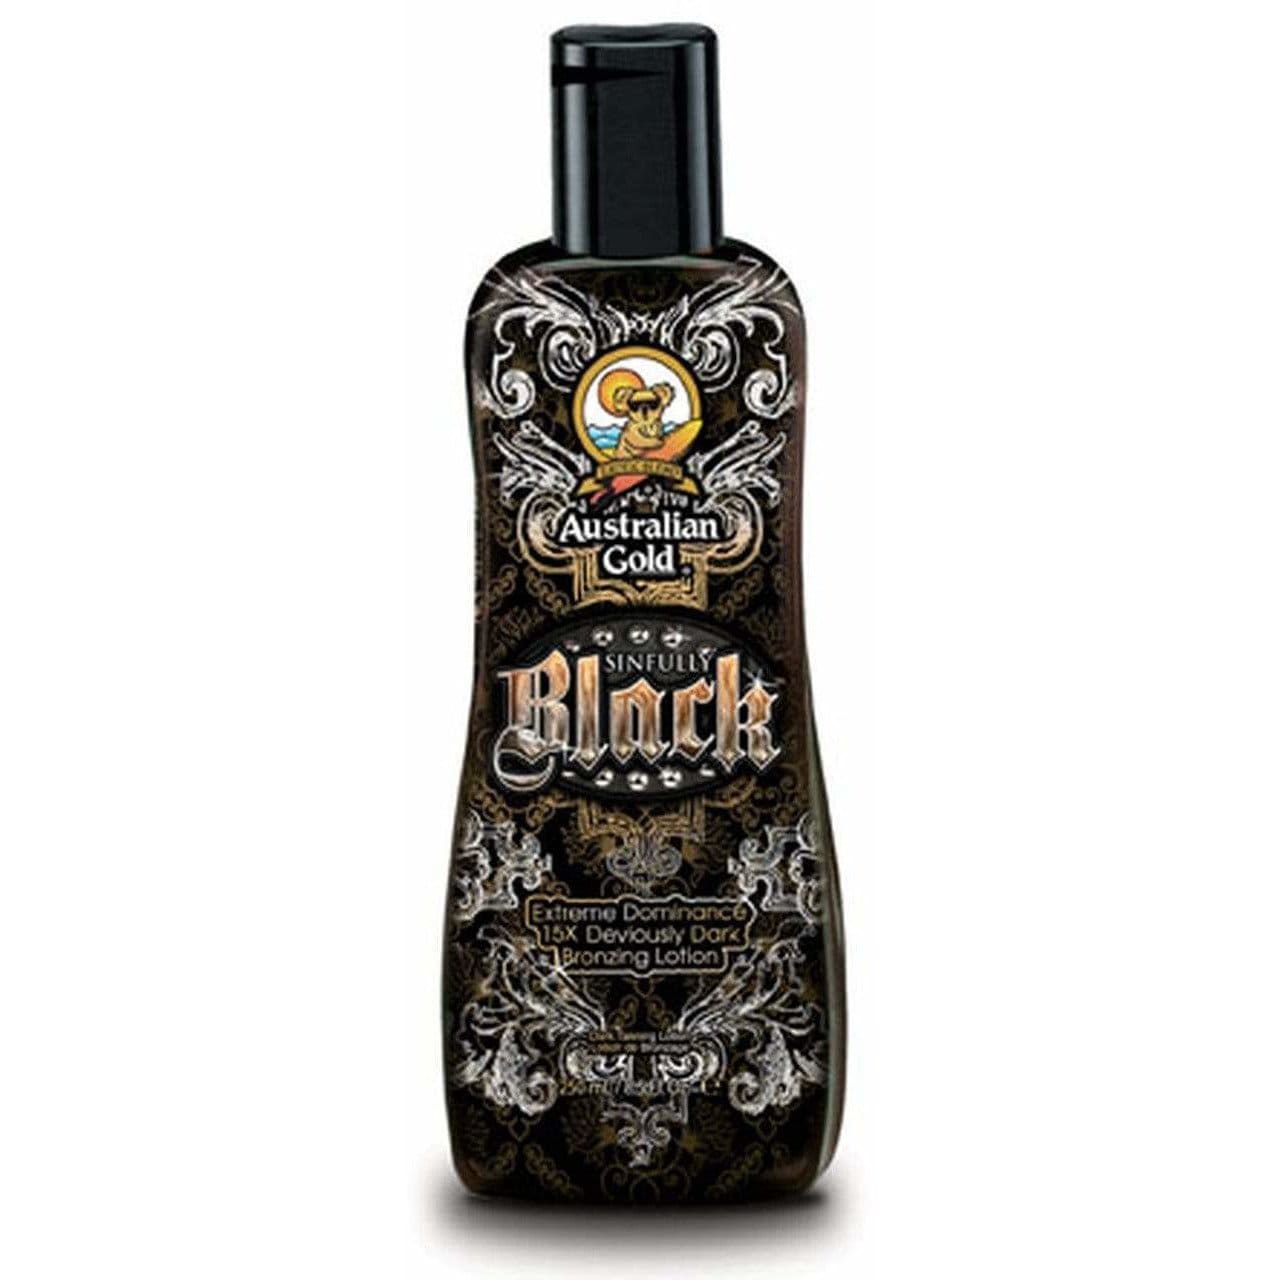 Gold Sinfully Black Extreme Dominance Deviously Dark Bronzer Tanning Lotion